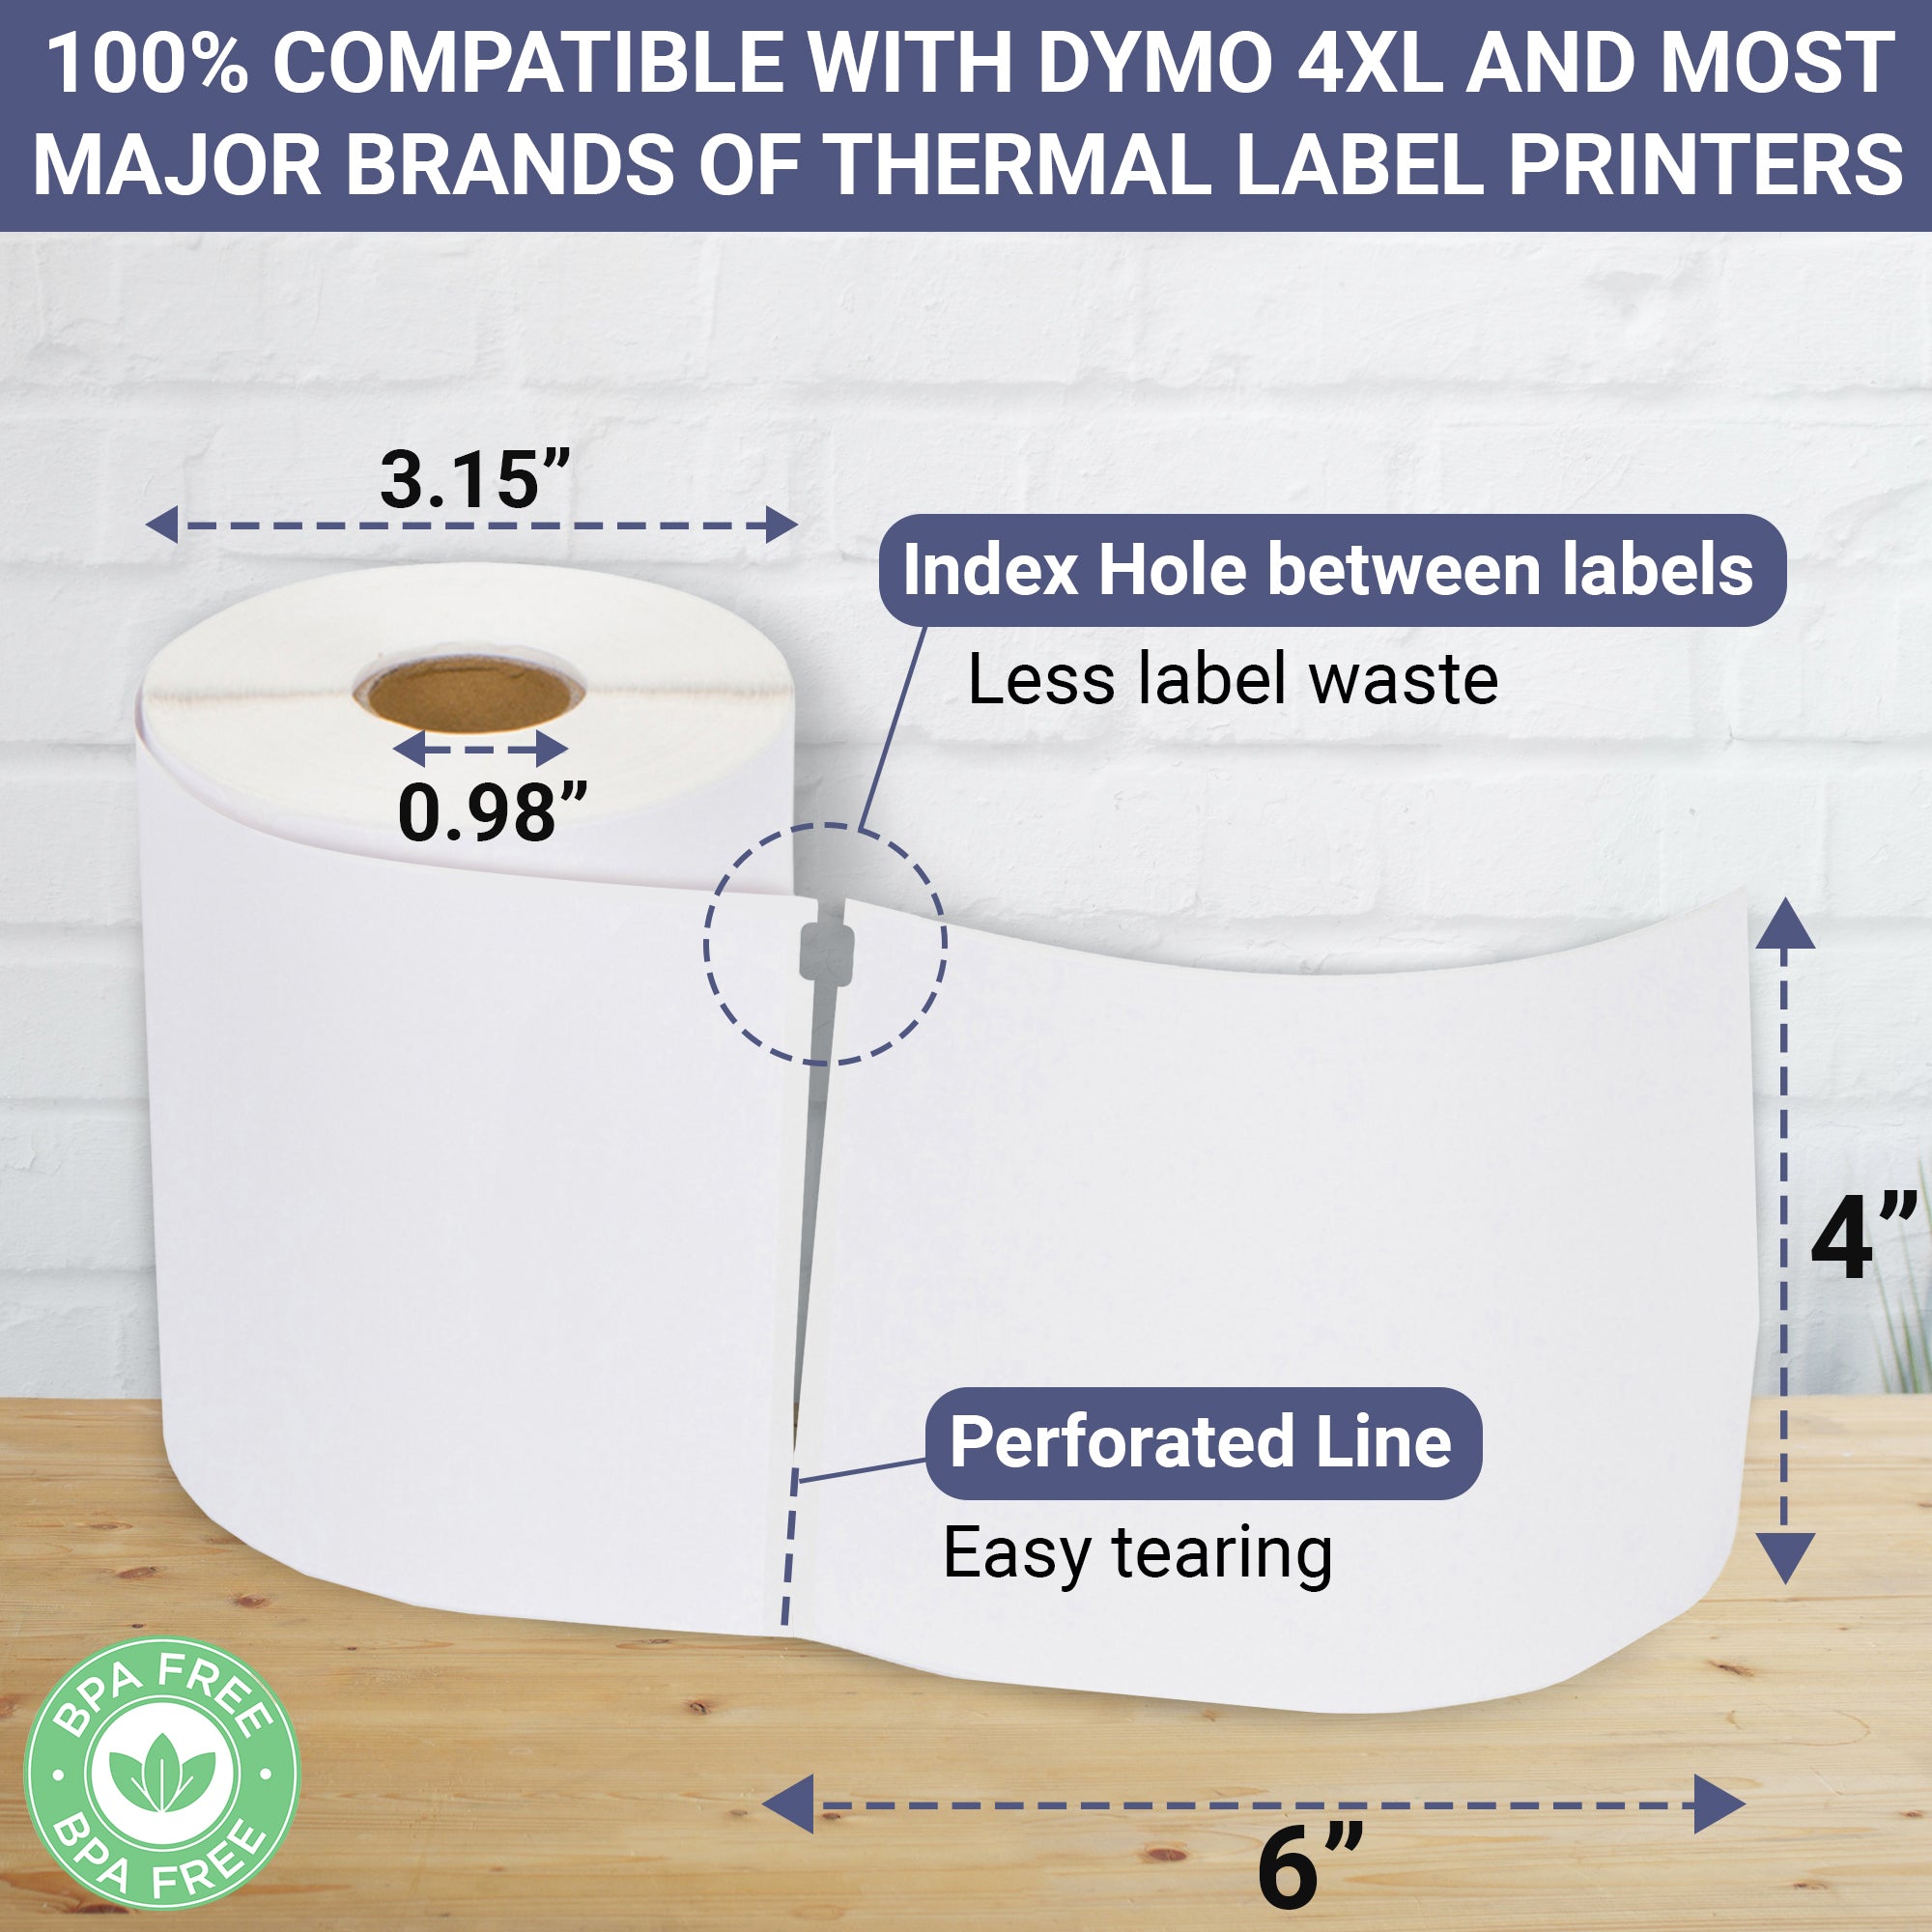 Dymo Shipping Labels